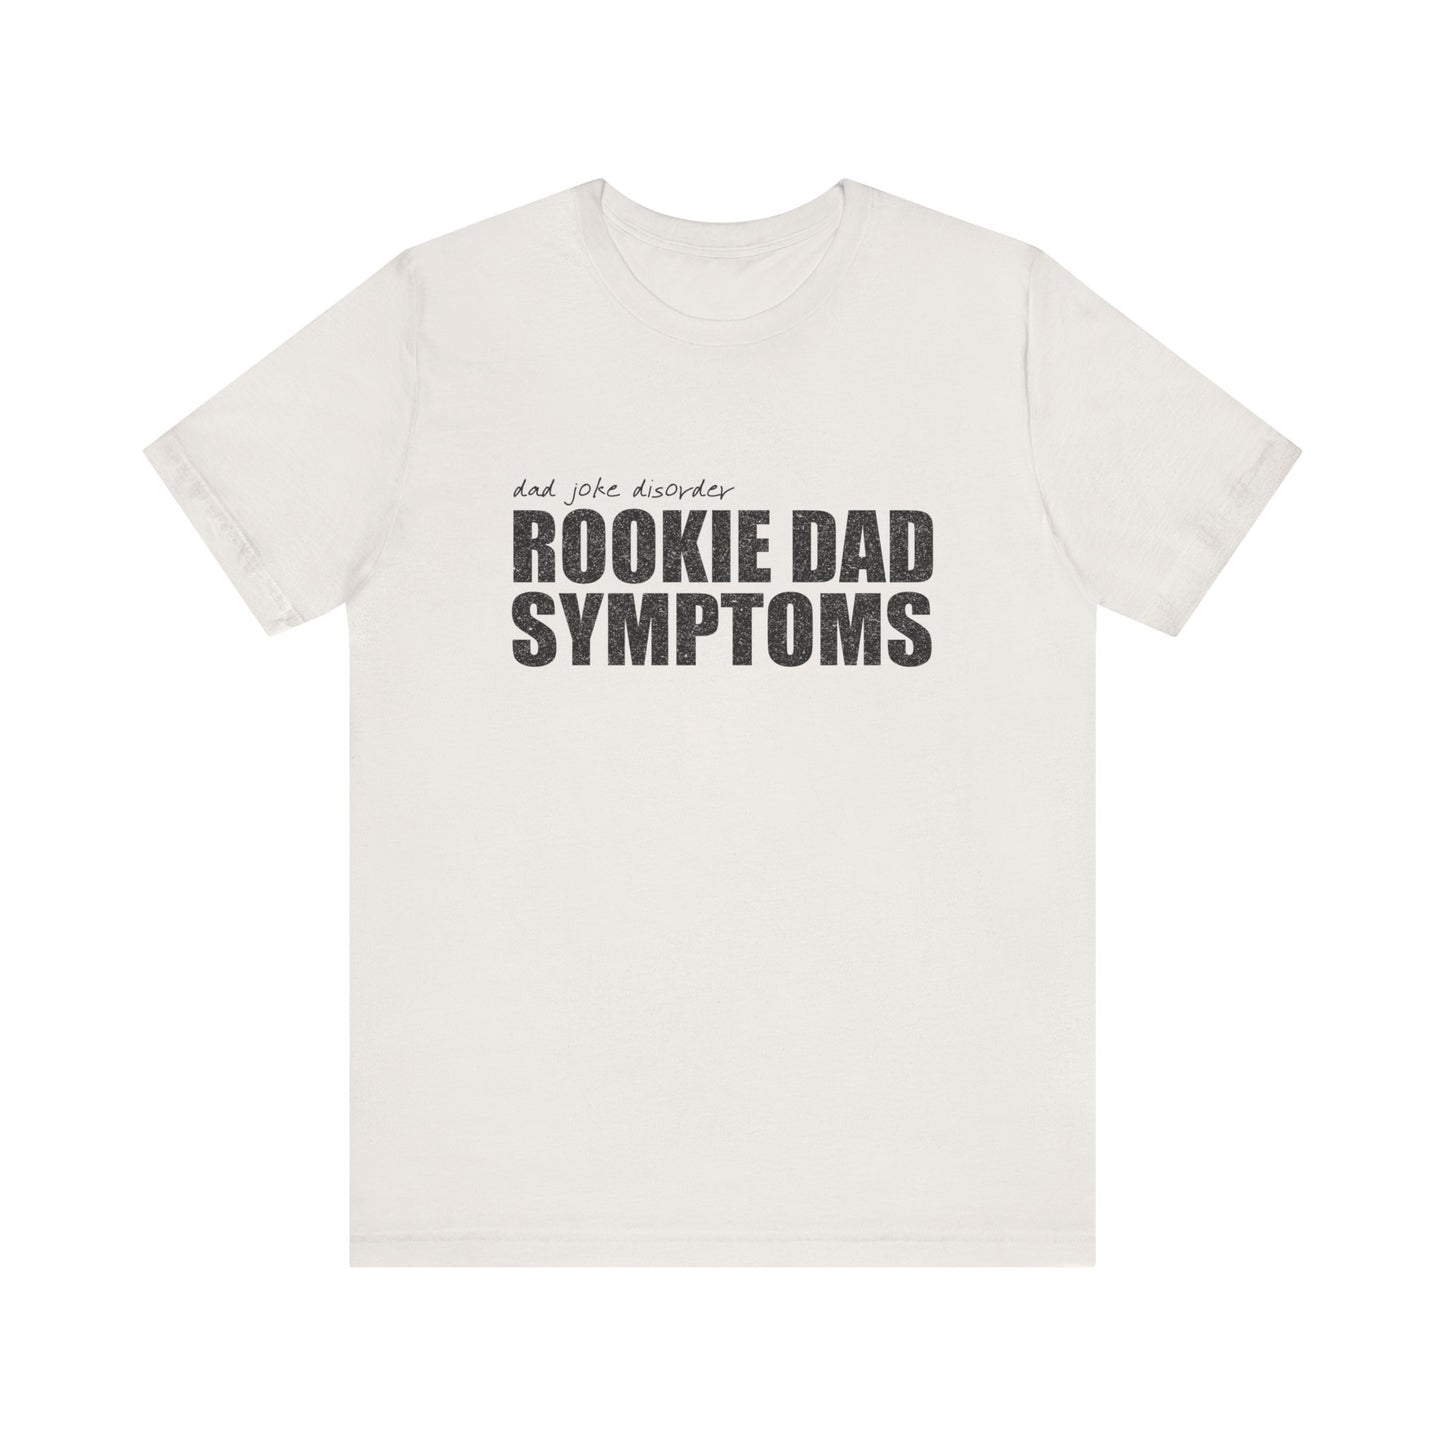 Rookie Dad Symptoms Shirt, New Dad Shirt, Father's Day Gift, Gift for New Born Dad, Gift for husband, Funny Dad Tee, First Time Father Shirt